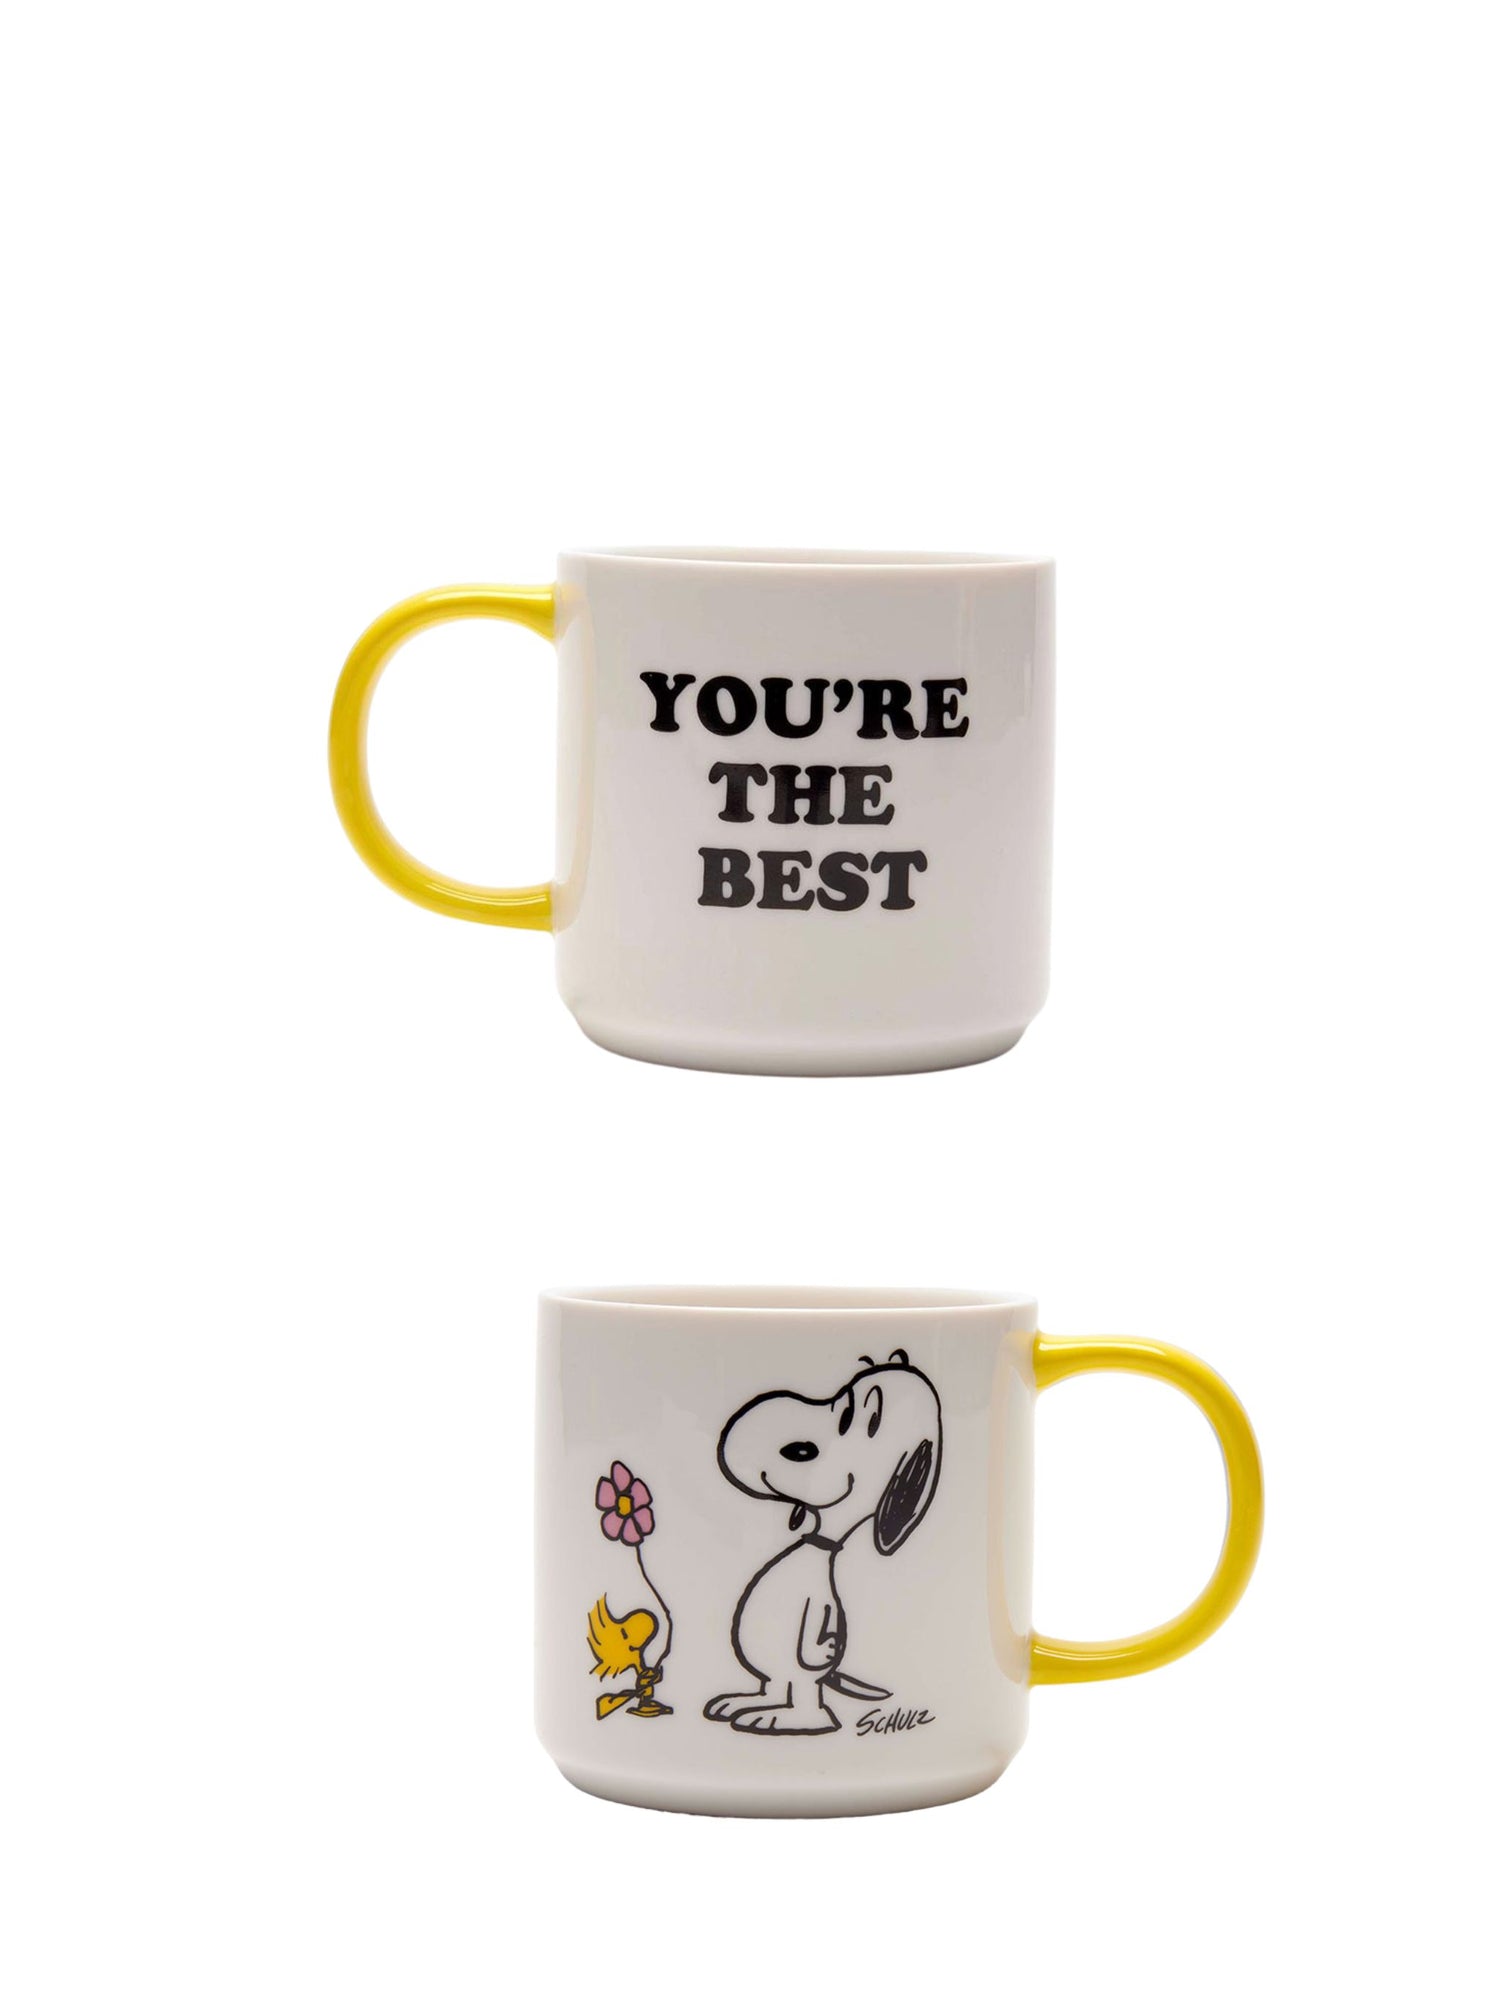 How did Charles M. Schulz knew you really are the best!!? Snoopy thinks so, too.